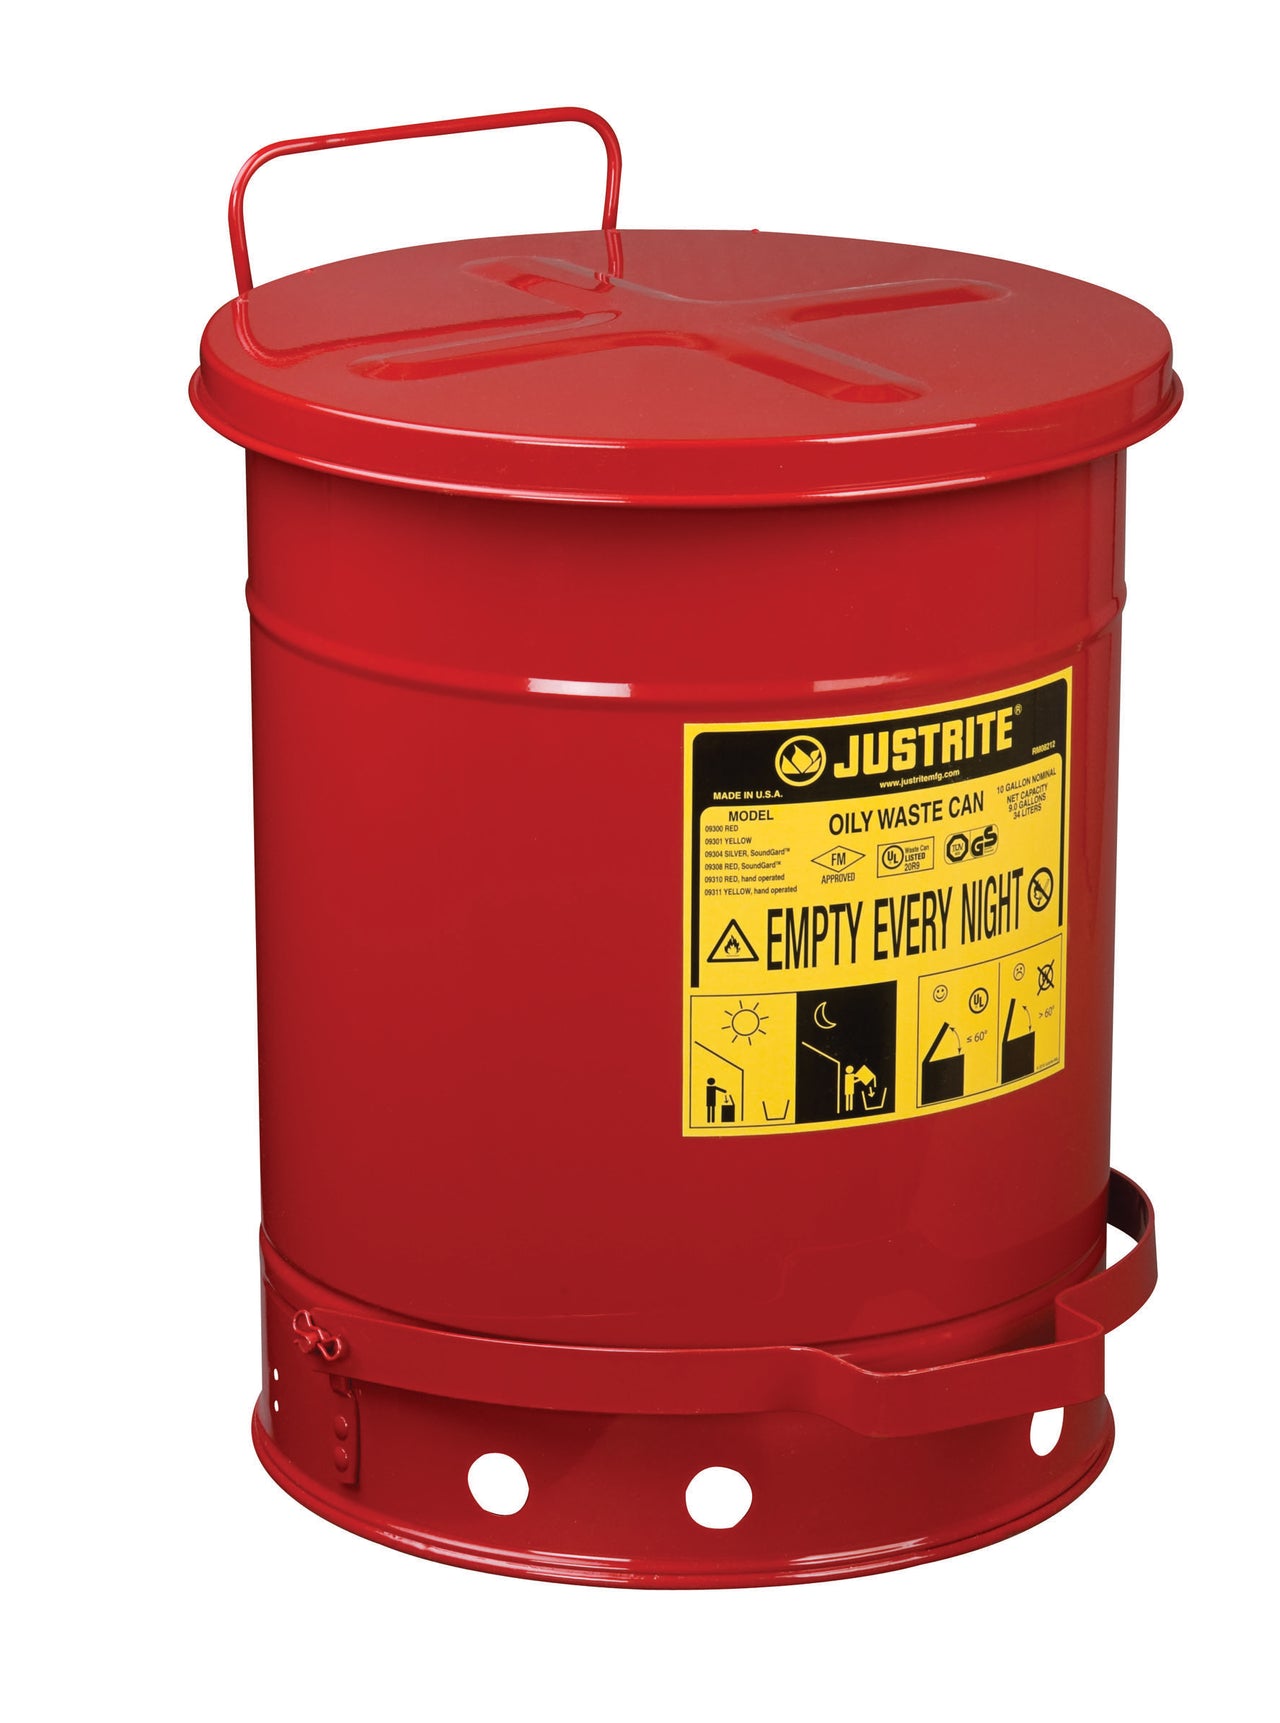 Justrite 10-Gallon Metal Oily Waste Can w/ Foot Operated Cover